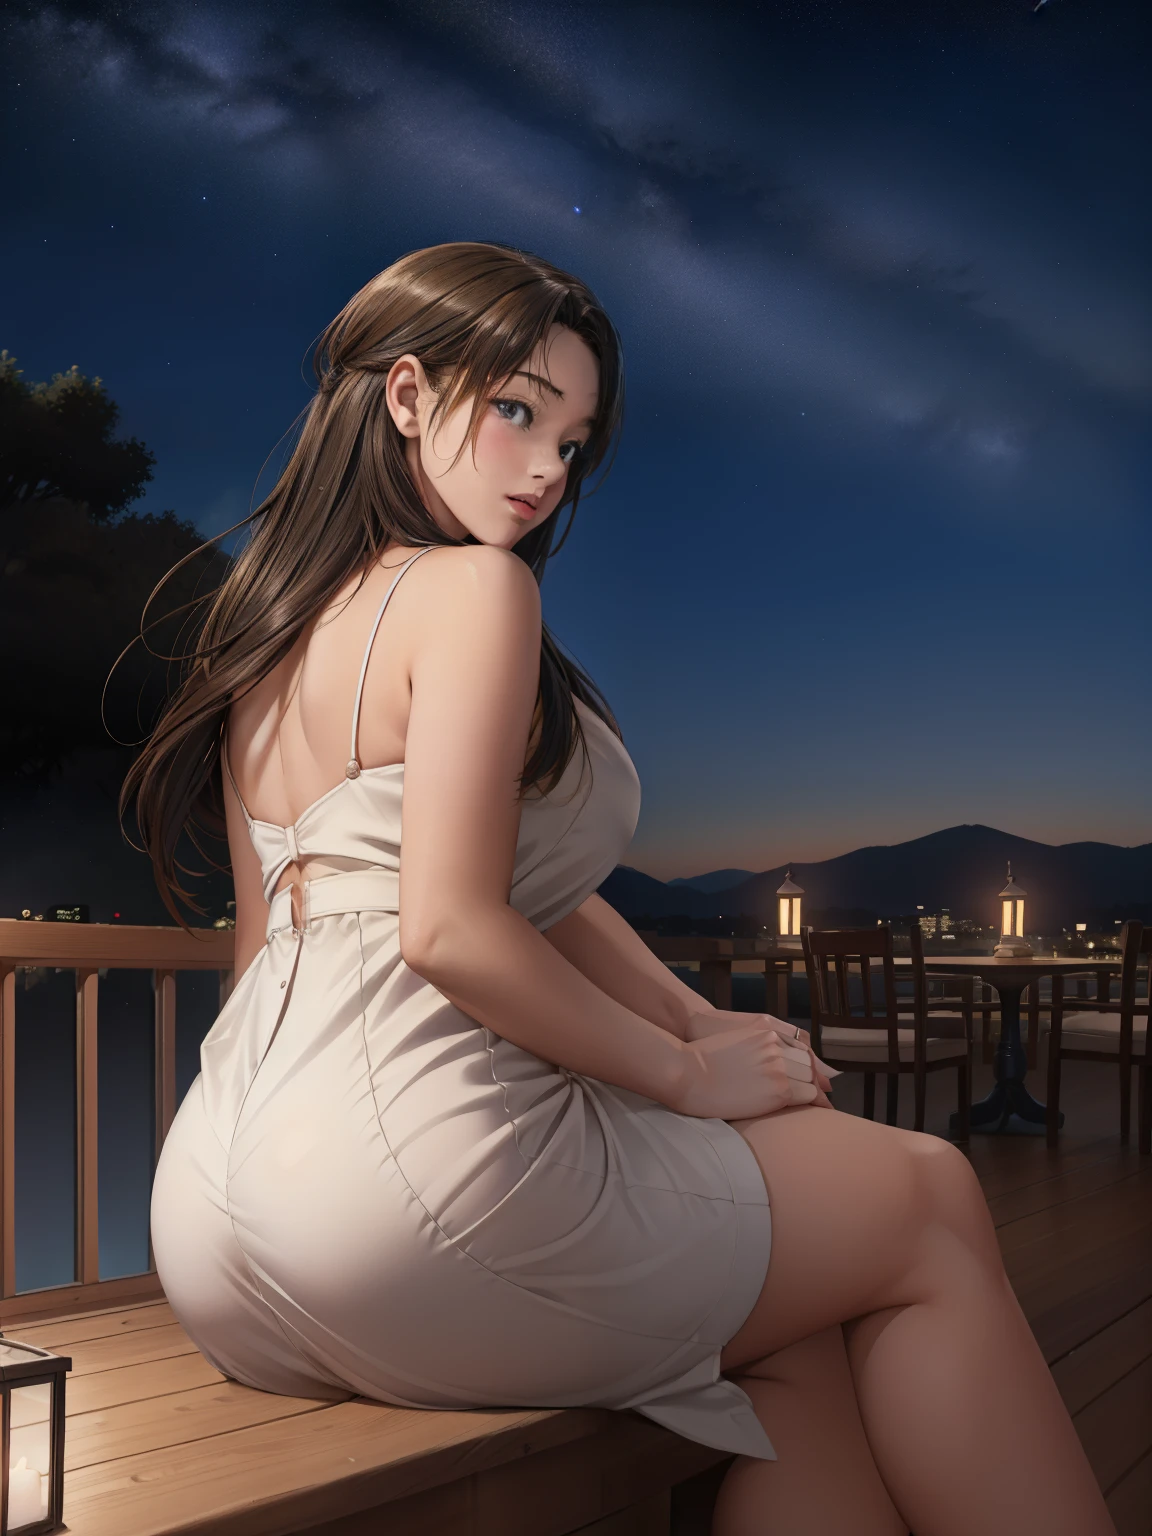 highest quality, masterpiece, Very detailed, Detailed Background, anime, 1 girl, Young girl, Short girl, sf, sf, Outdoor, night, Starry Sky, greenhouse, giant structure, Biodome, Wind景, scenery, horizon, rooftop, sitting on rooftop, Wind, avert your eyes, Atmospheric lighting, Focus Only, close, From the side, Written boundary depth, Bokeh, Shooting from behind, The clothes are tight and the figure is clearly visible, ((Draw your fingers carefully:1.5))
